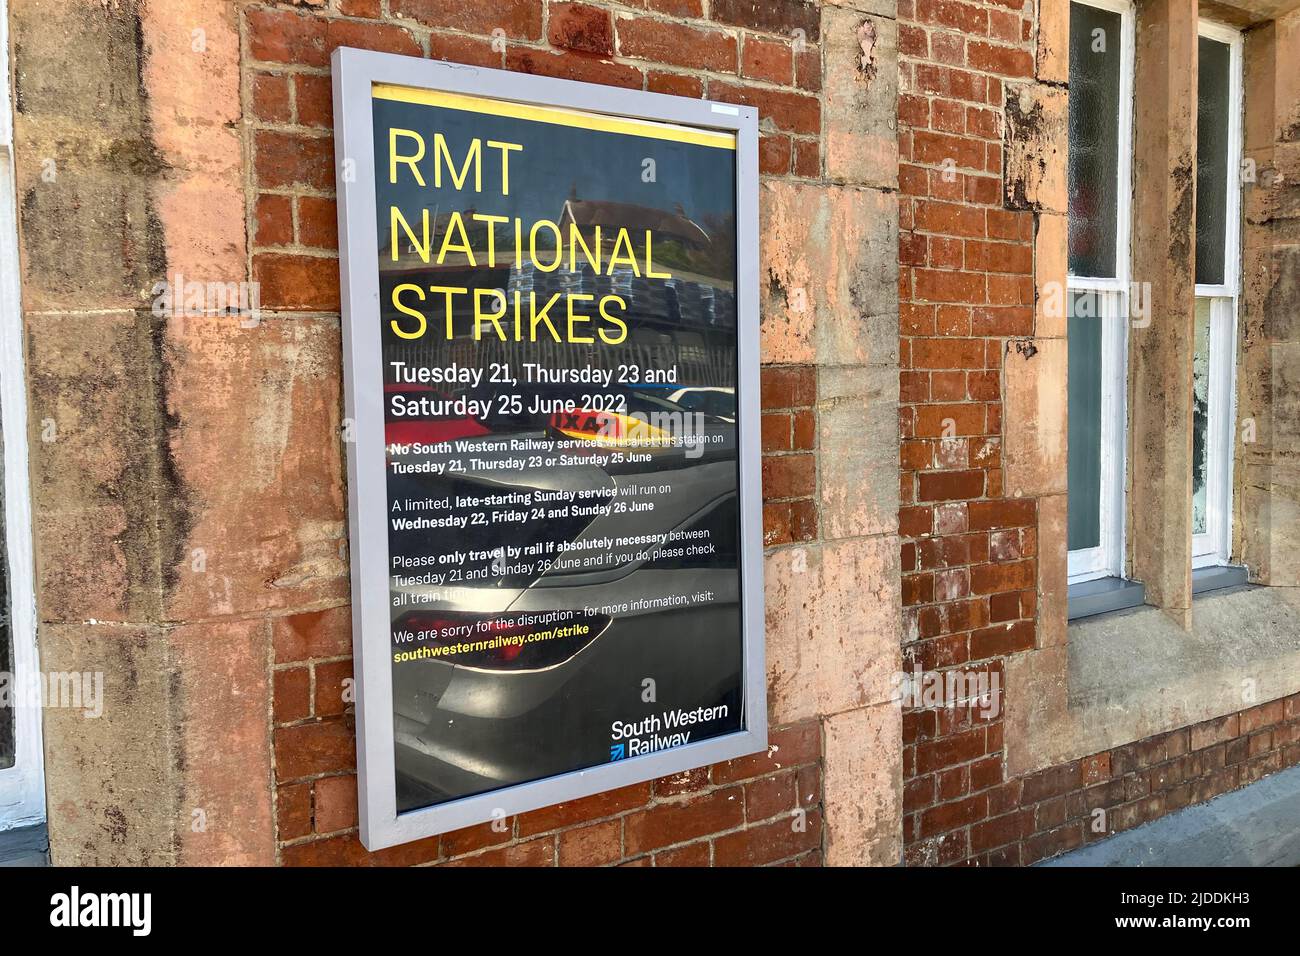 Axminster, Devon, UK.  20th June 2022.  RMT Rail Strike: RMT National Strike poster at the entrance to the railway station at Axminster in Devon on the London Waterloo to Exeter line served by South Western Railways which will have no trains on Tuesday 21st, Thursday 23rd and Saturday 25th June 2022 due to the rail strike by the RMT Union.  Picture Credit: Graham Hunt/Alamy Live News Stock Photo